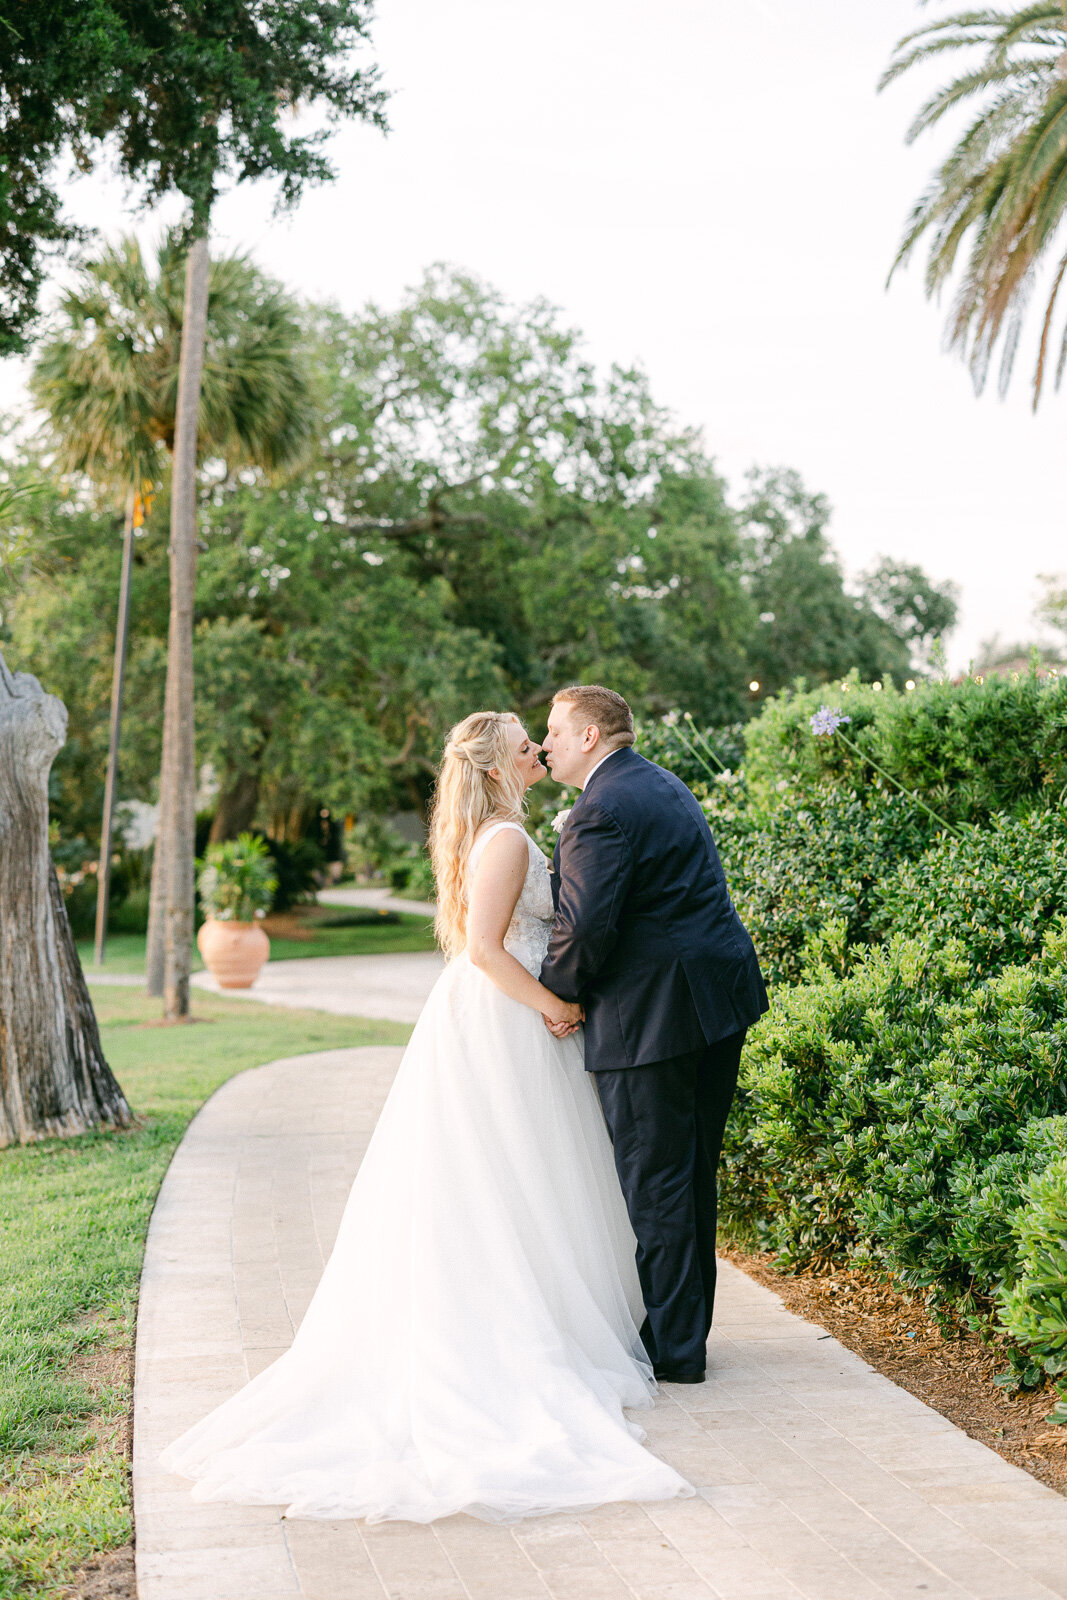 sea island wedding photography - intimate elopement - Darian Reilly Photography-65